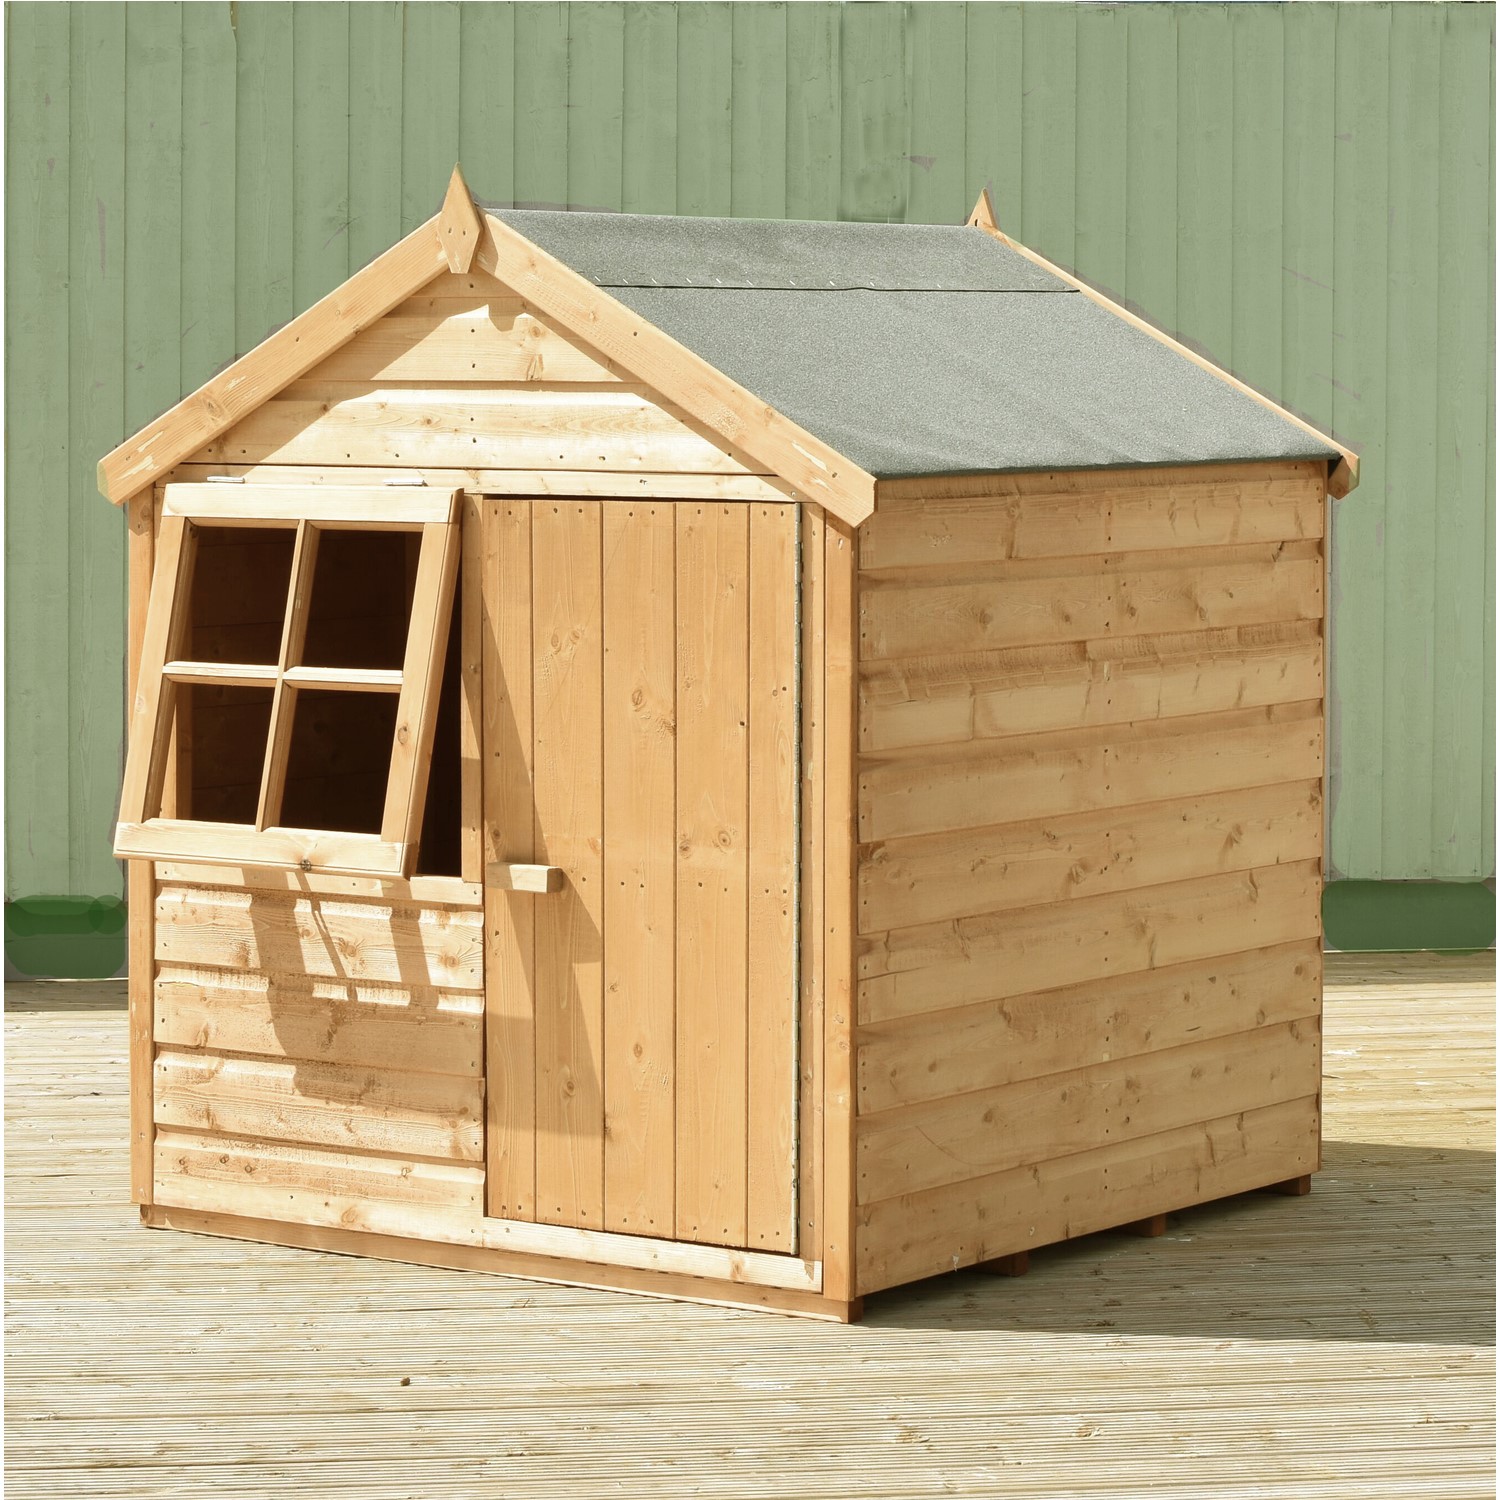 Photo of Kids outdoor wooden playhouse - shire